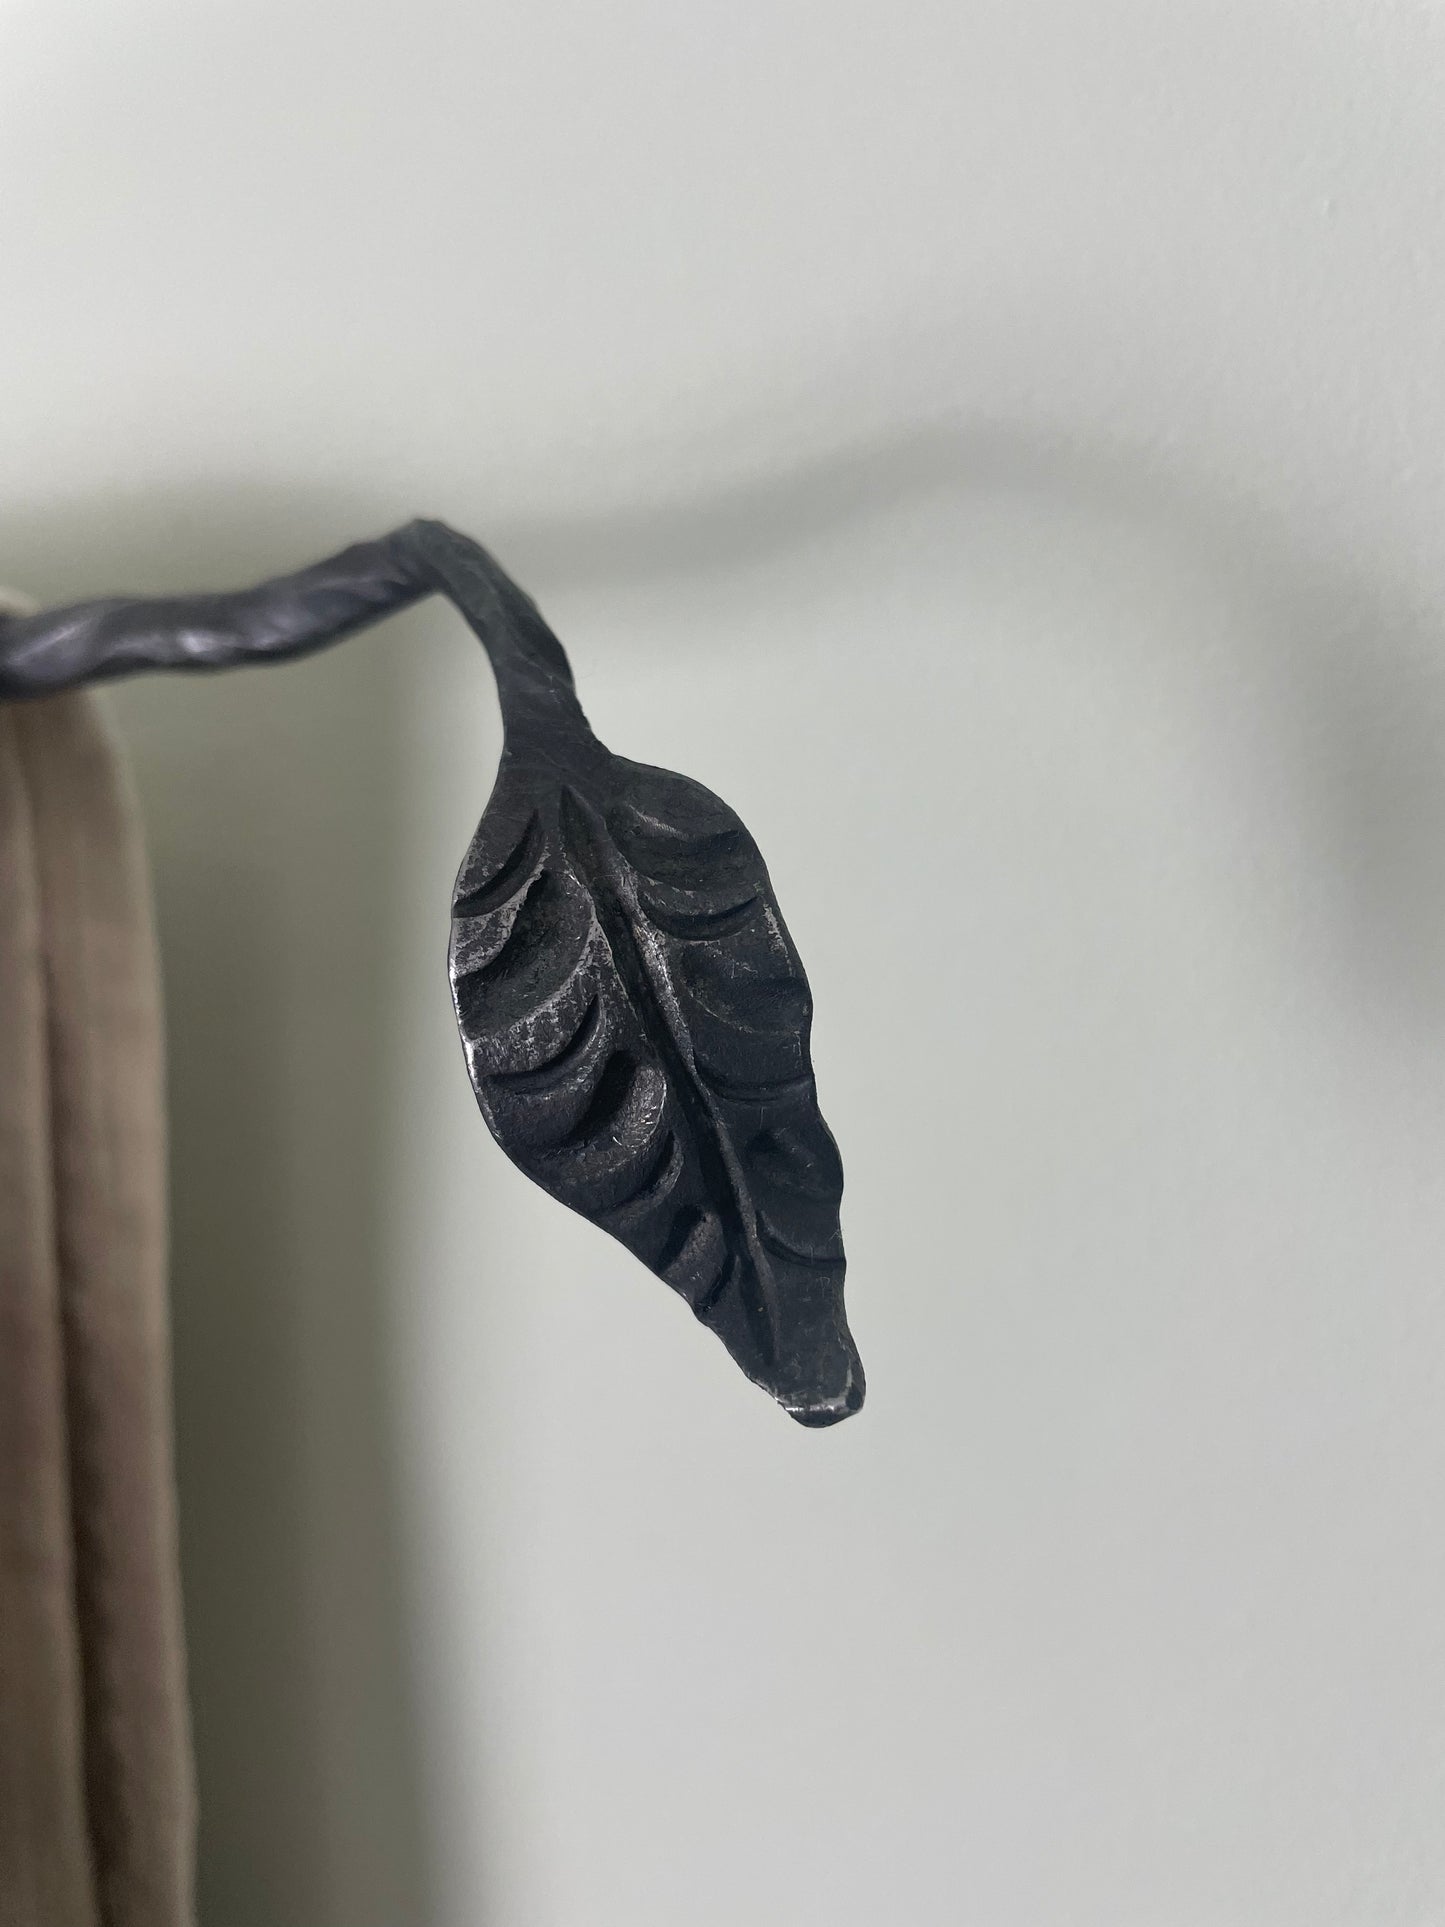 Forged Hand Towel Holder - Pike Lake Forge